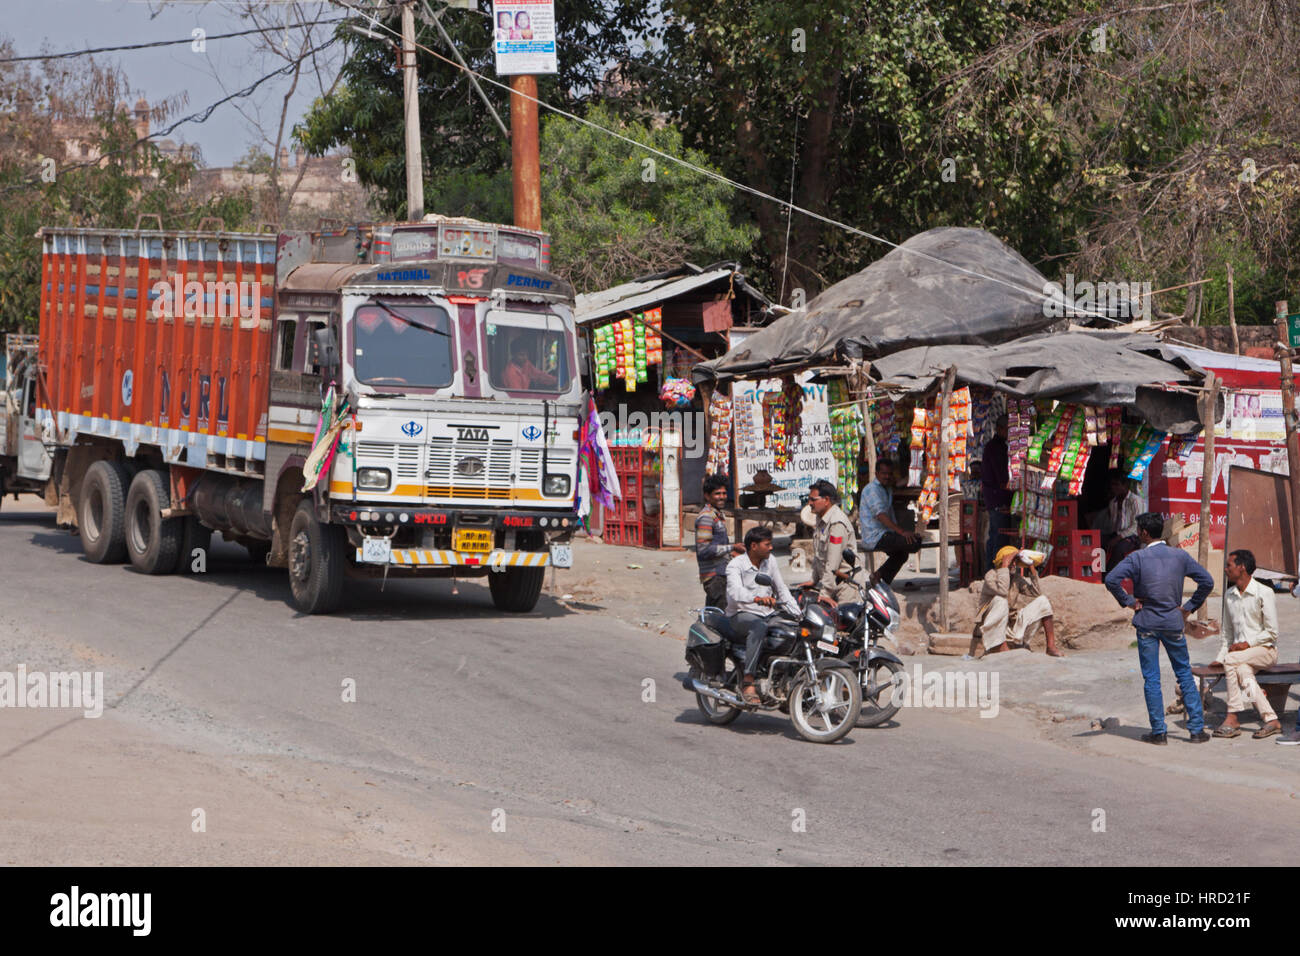 Scene at a rural truck stop in the central Indian state of Madhya Pradesh.There are many such service halts throughout the countryside Stock Photo